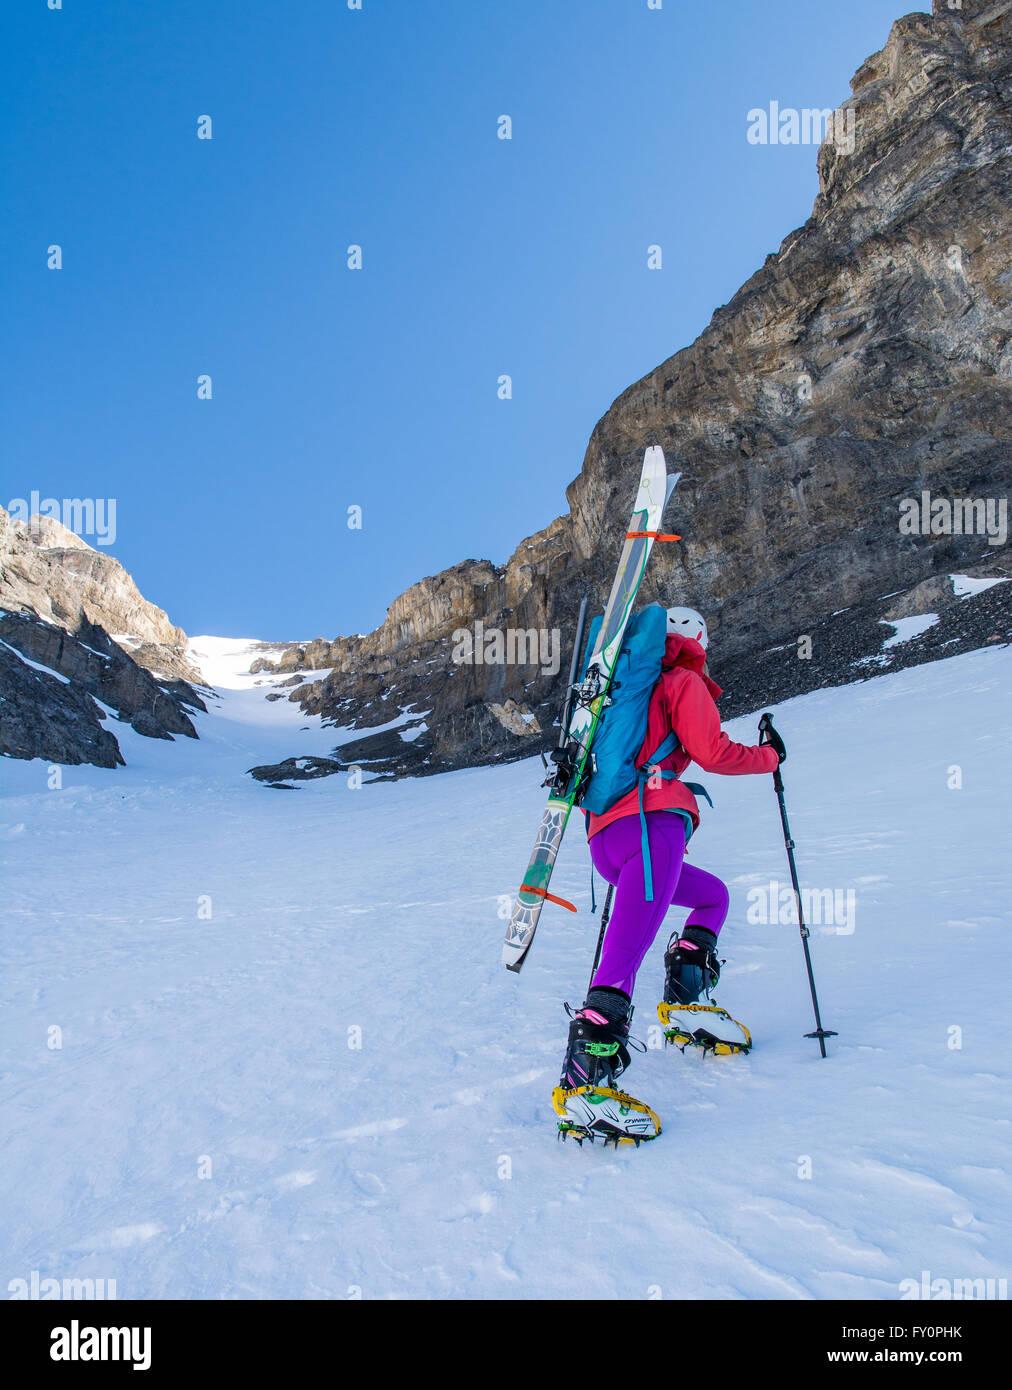 Ski mountaineer ascending to the summit of the 'Super Gully' on Lost River Peak in Idaho Stock Photo